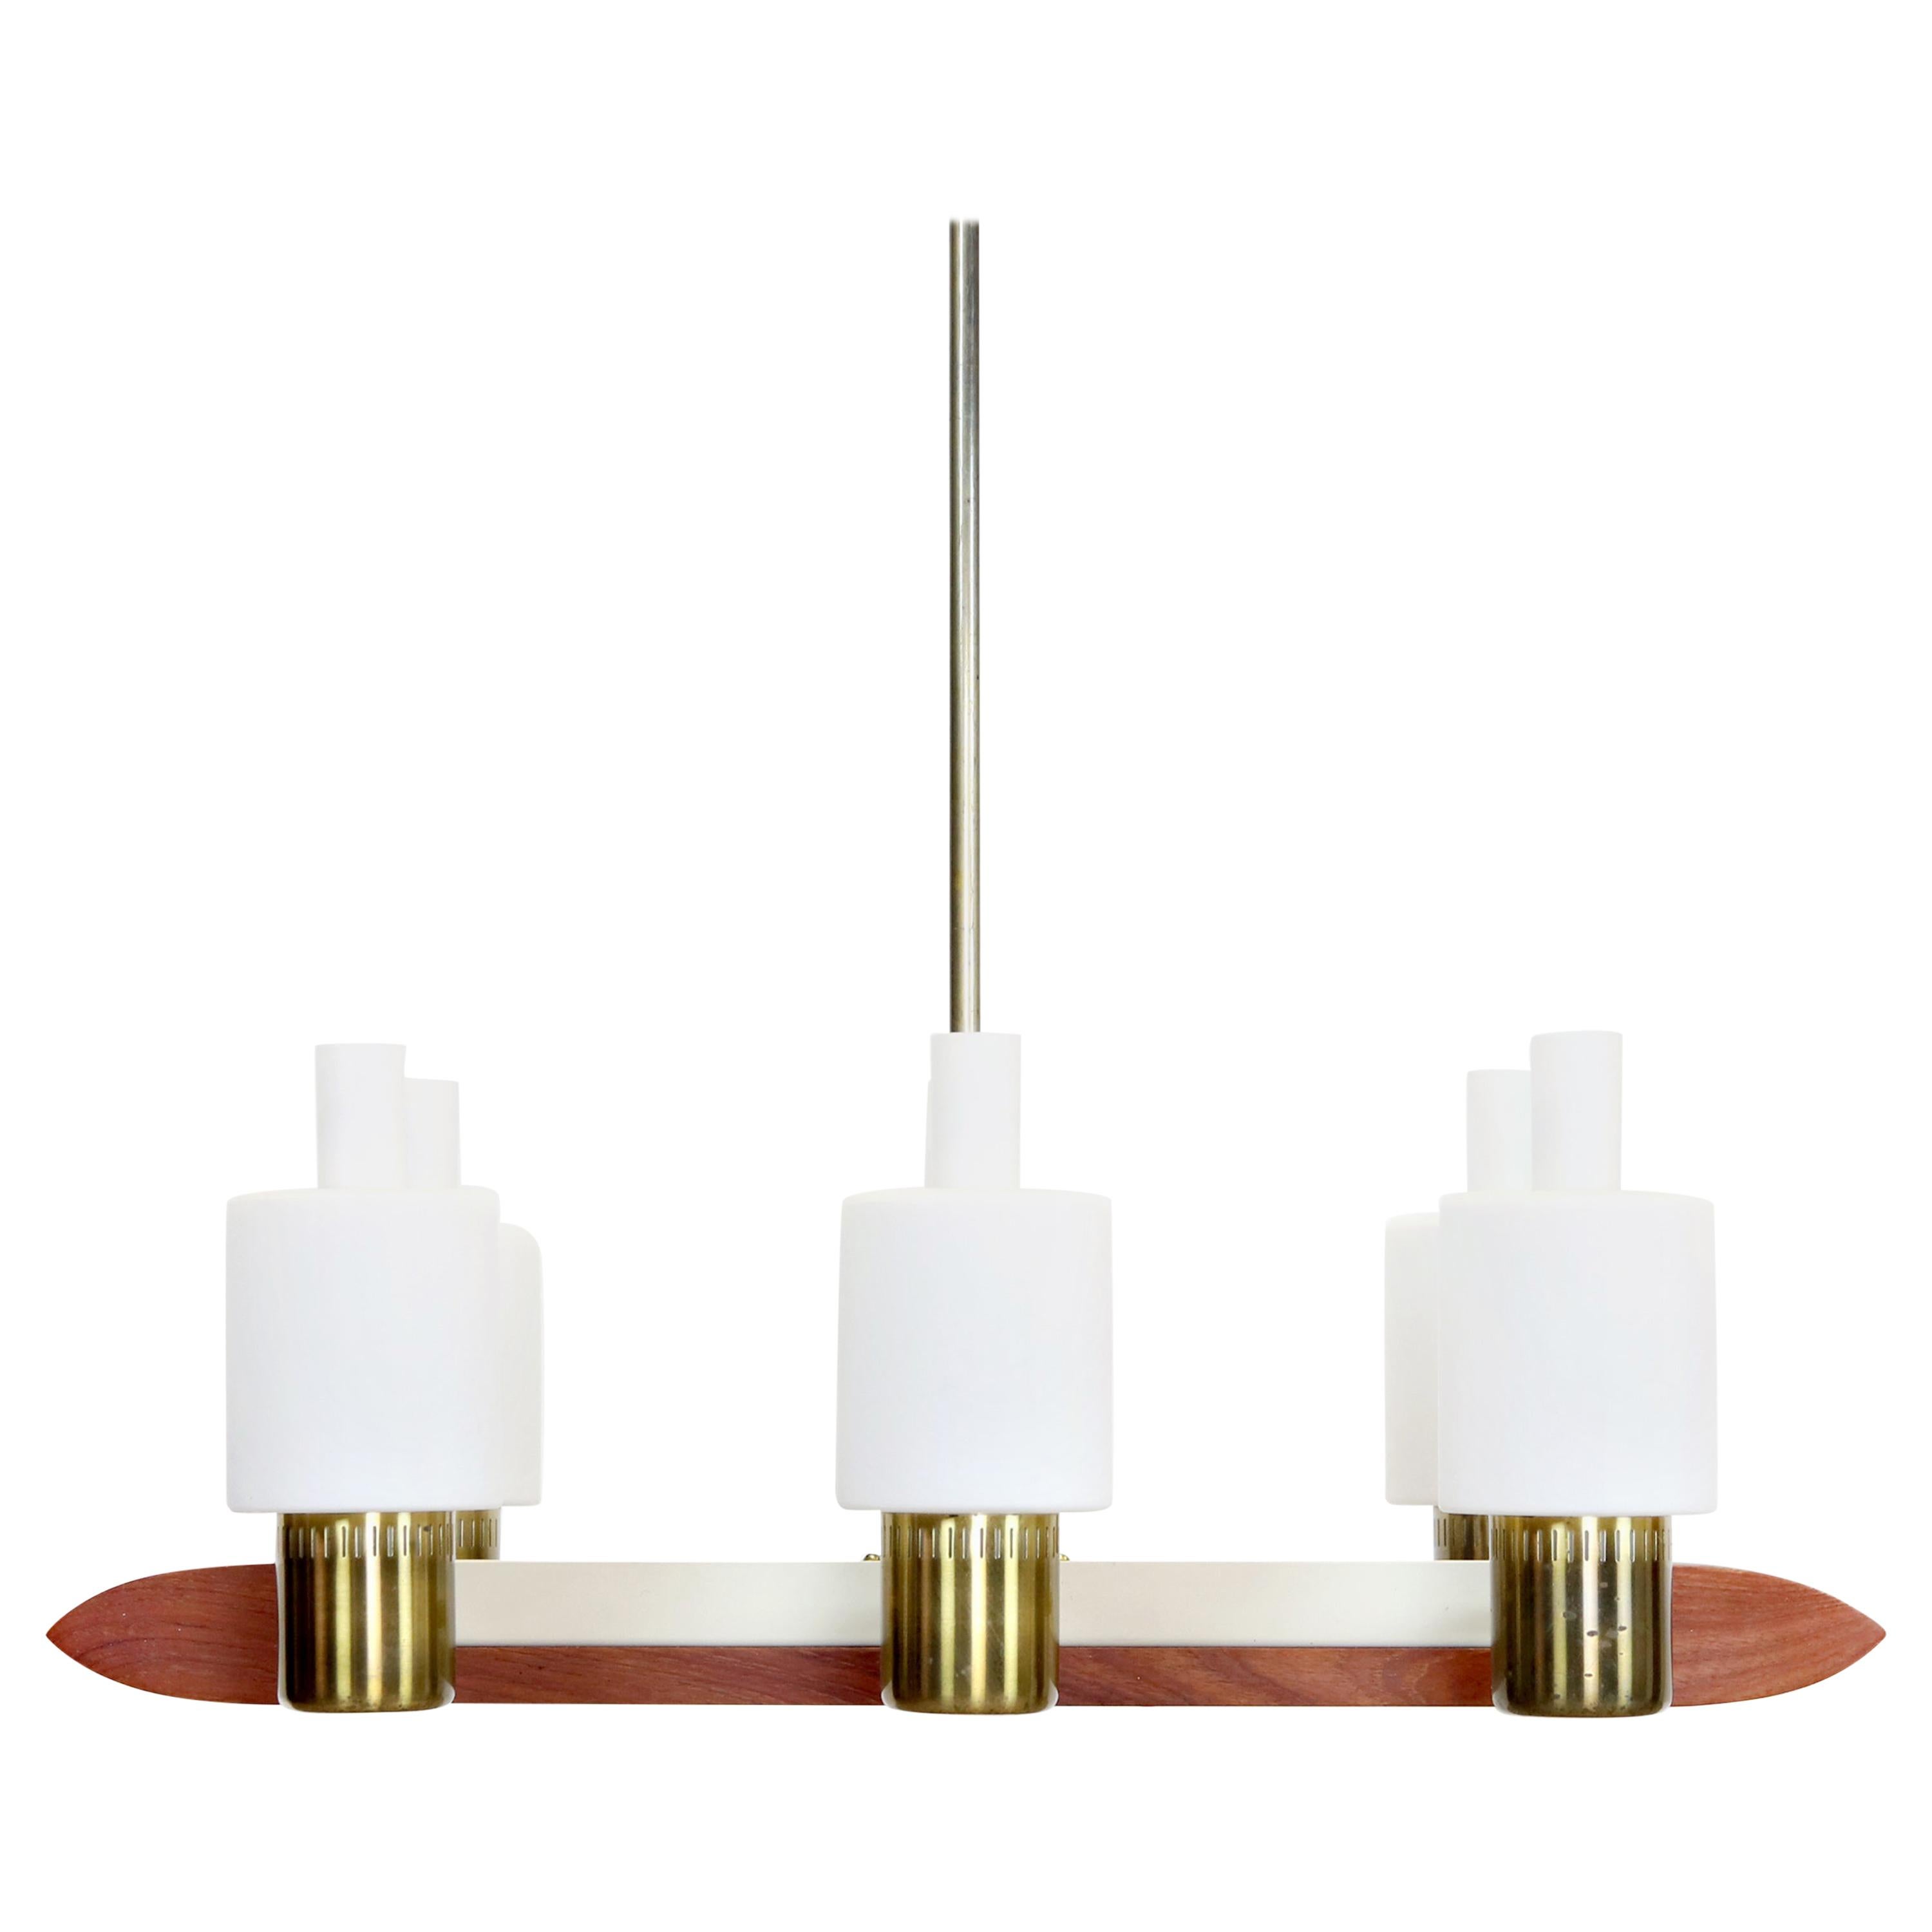 This rare and stylish lamp was designed by the Danish designer Jo Hammerborg for Fog & Mørup in 1962. The Minimalist and elegant design makes clever use of the combination of warm materials such as Teak and Brass in combination with the matte